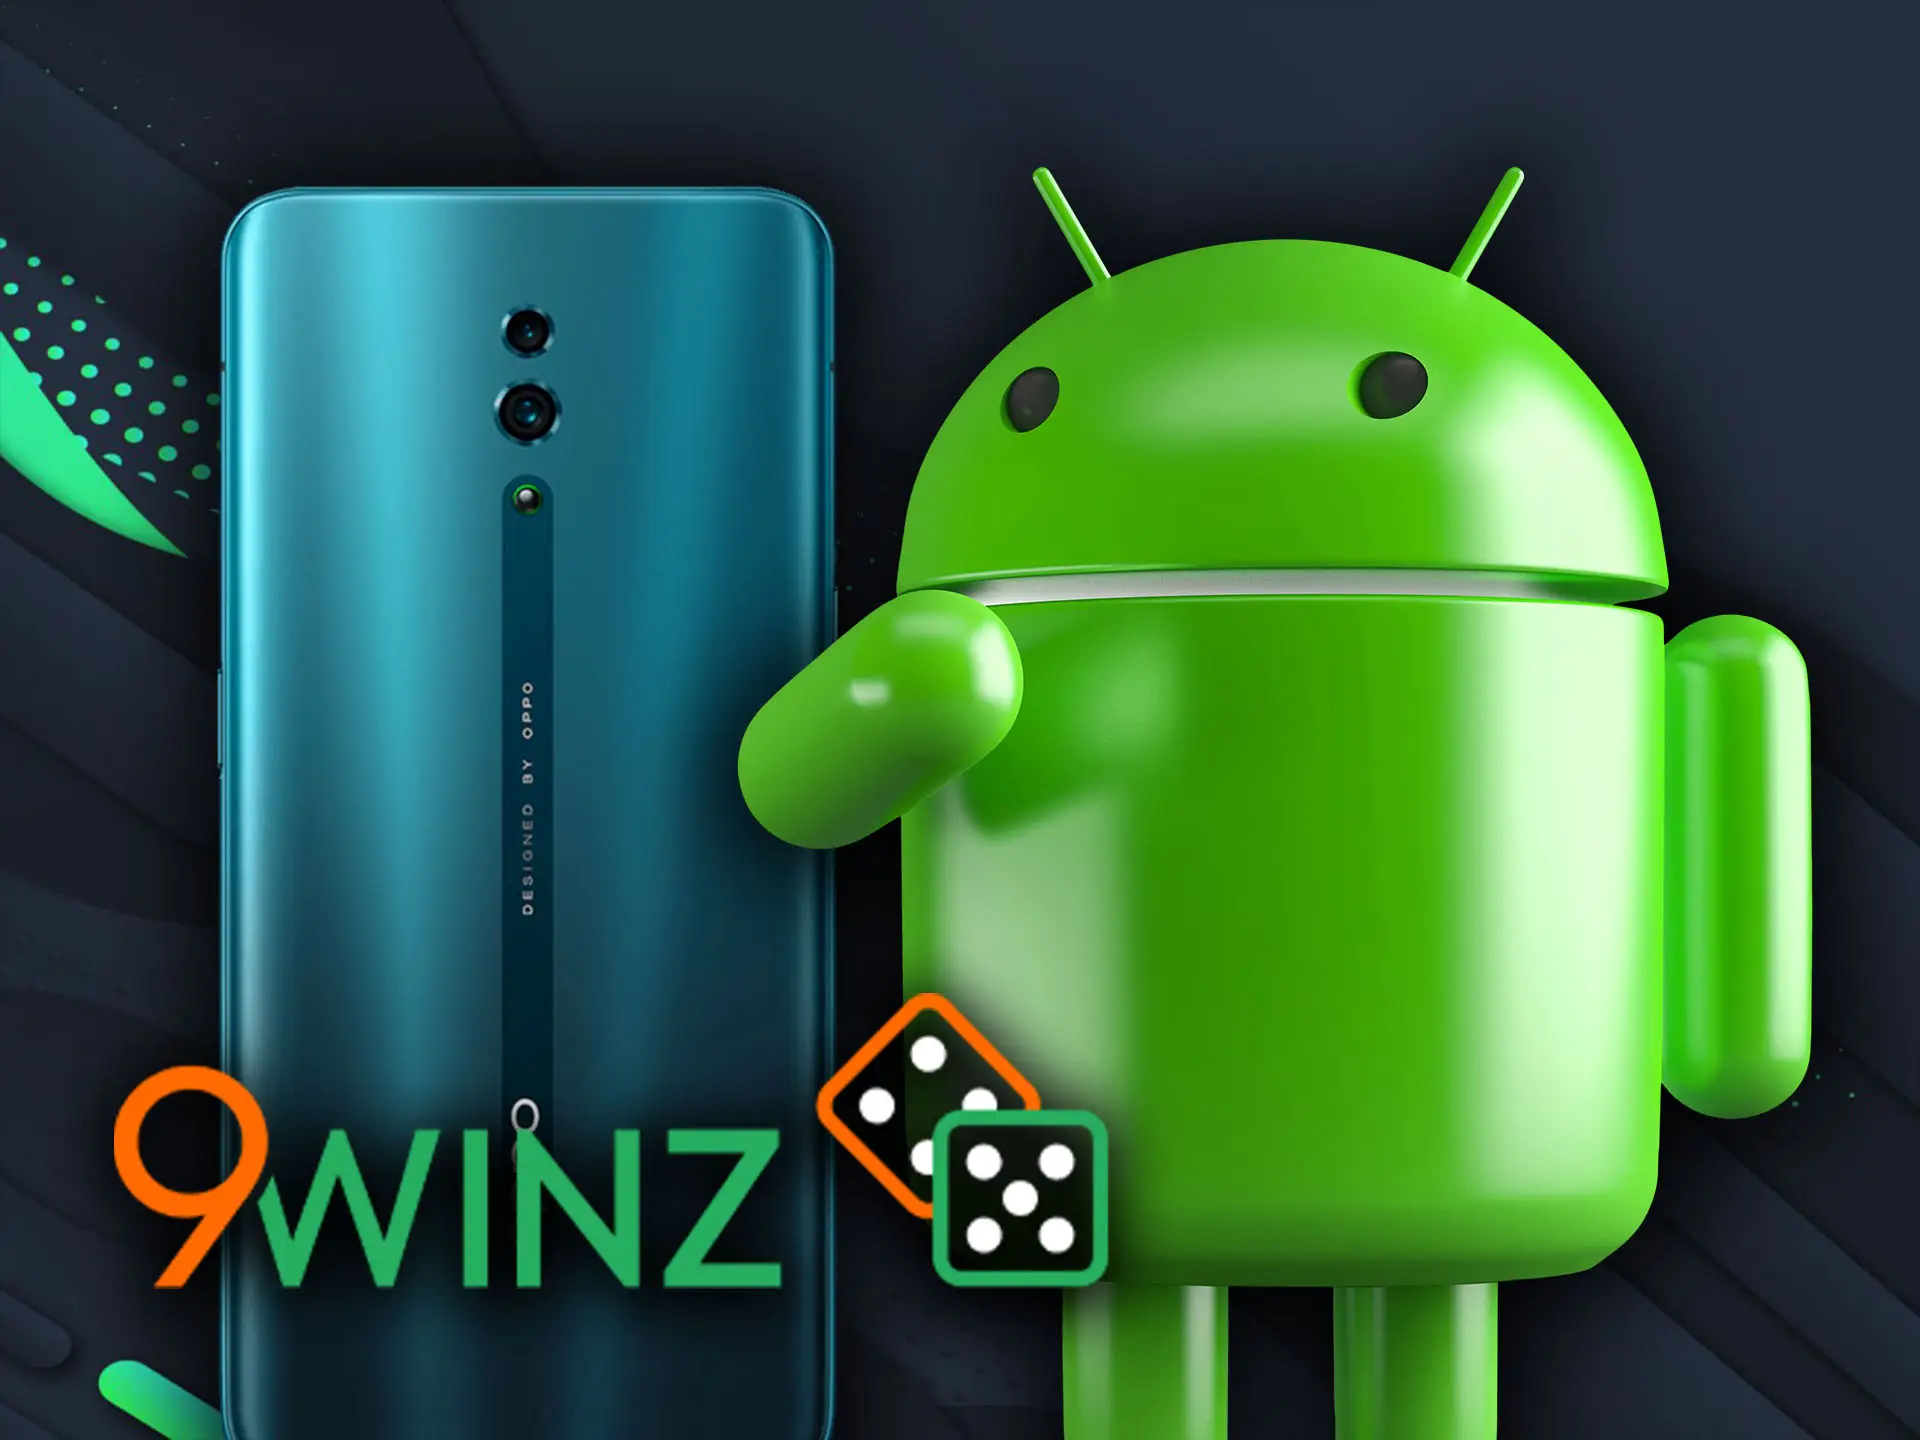 Download and Install 9winz apk android on any compatible Android device.